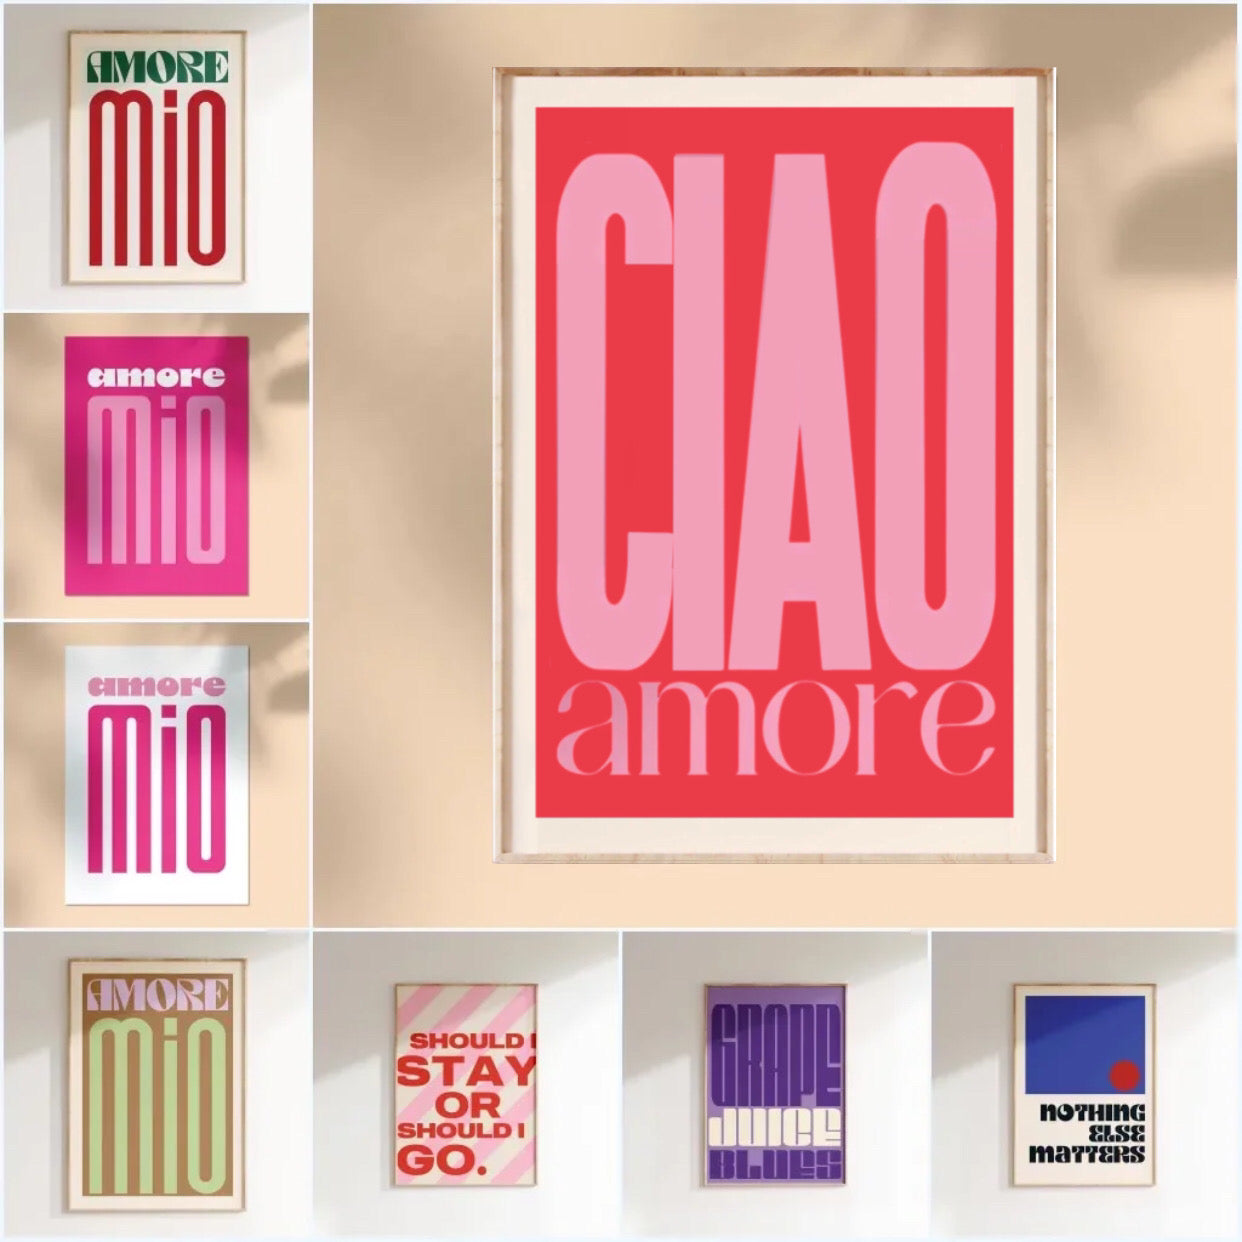 " ciao amore " poster